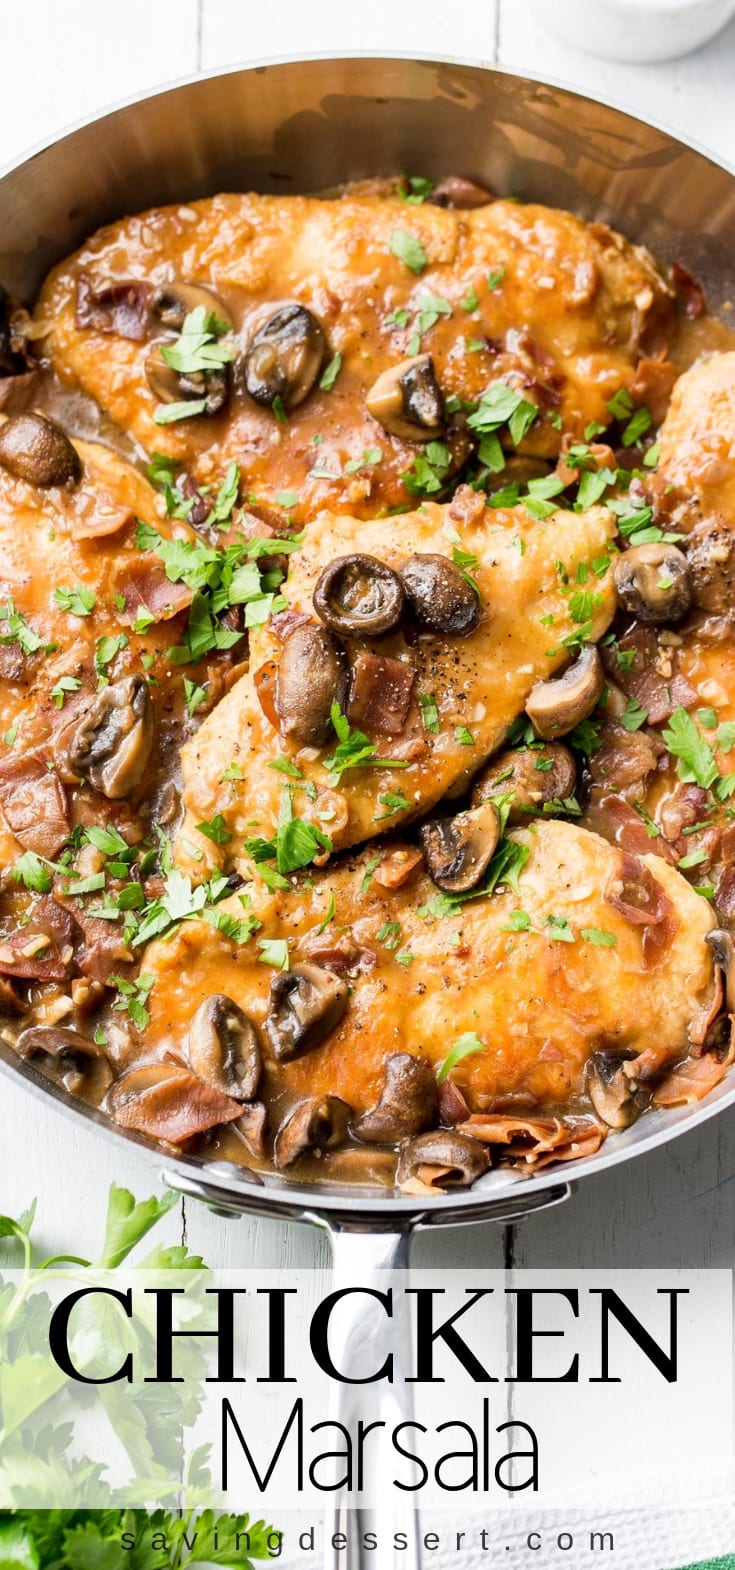 Classic Chicken Marsala ~ tender chicken breasts are seasoned and sautéed, then simmered in a Marsala wine sauce with shallots, prosciutto, and plenty of earthy mushrooms.   #chickenmarsala #chickendish #chicken #chickenmushrooms #marsala #easydinner